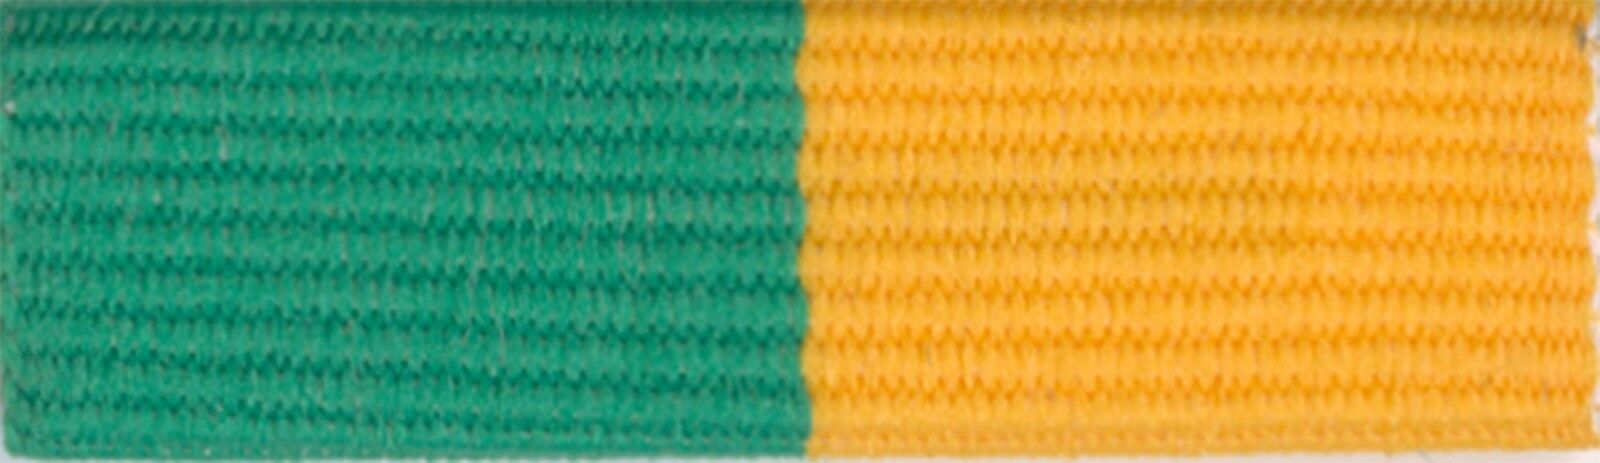 Boy Scouts of America Official Explorer Crime Prevention Ribbon Bar Award New